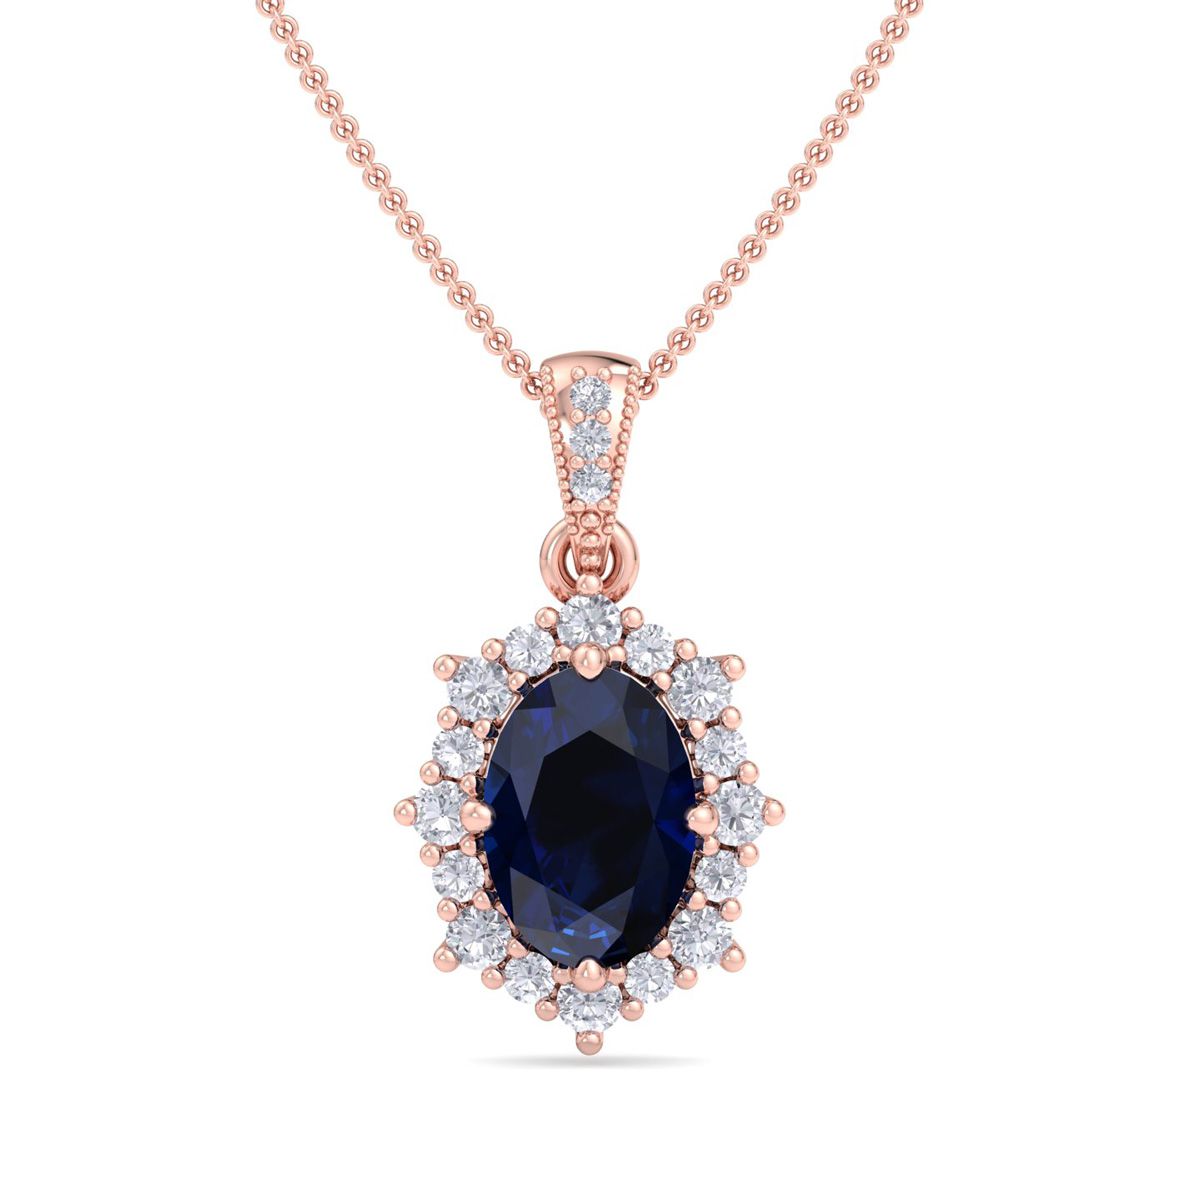 Sselects 1 3/4 Carat Oval Shape Sapphire And Diamond Necklace In 14k In Multi